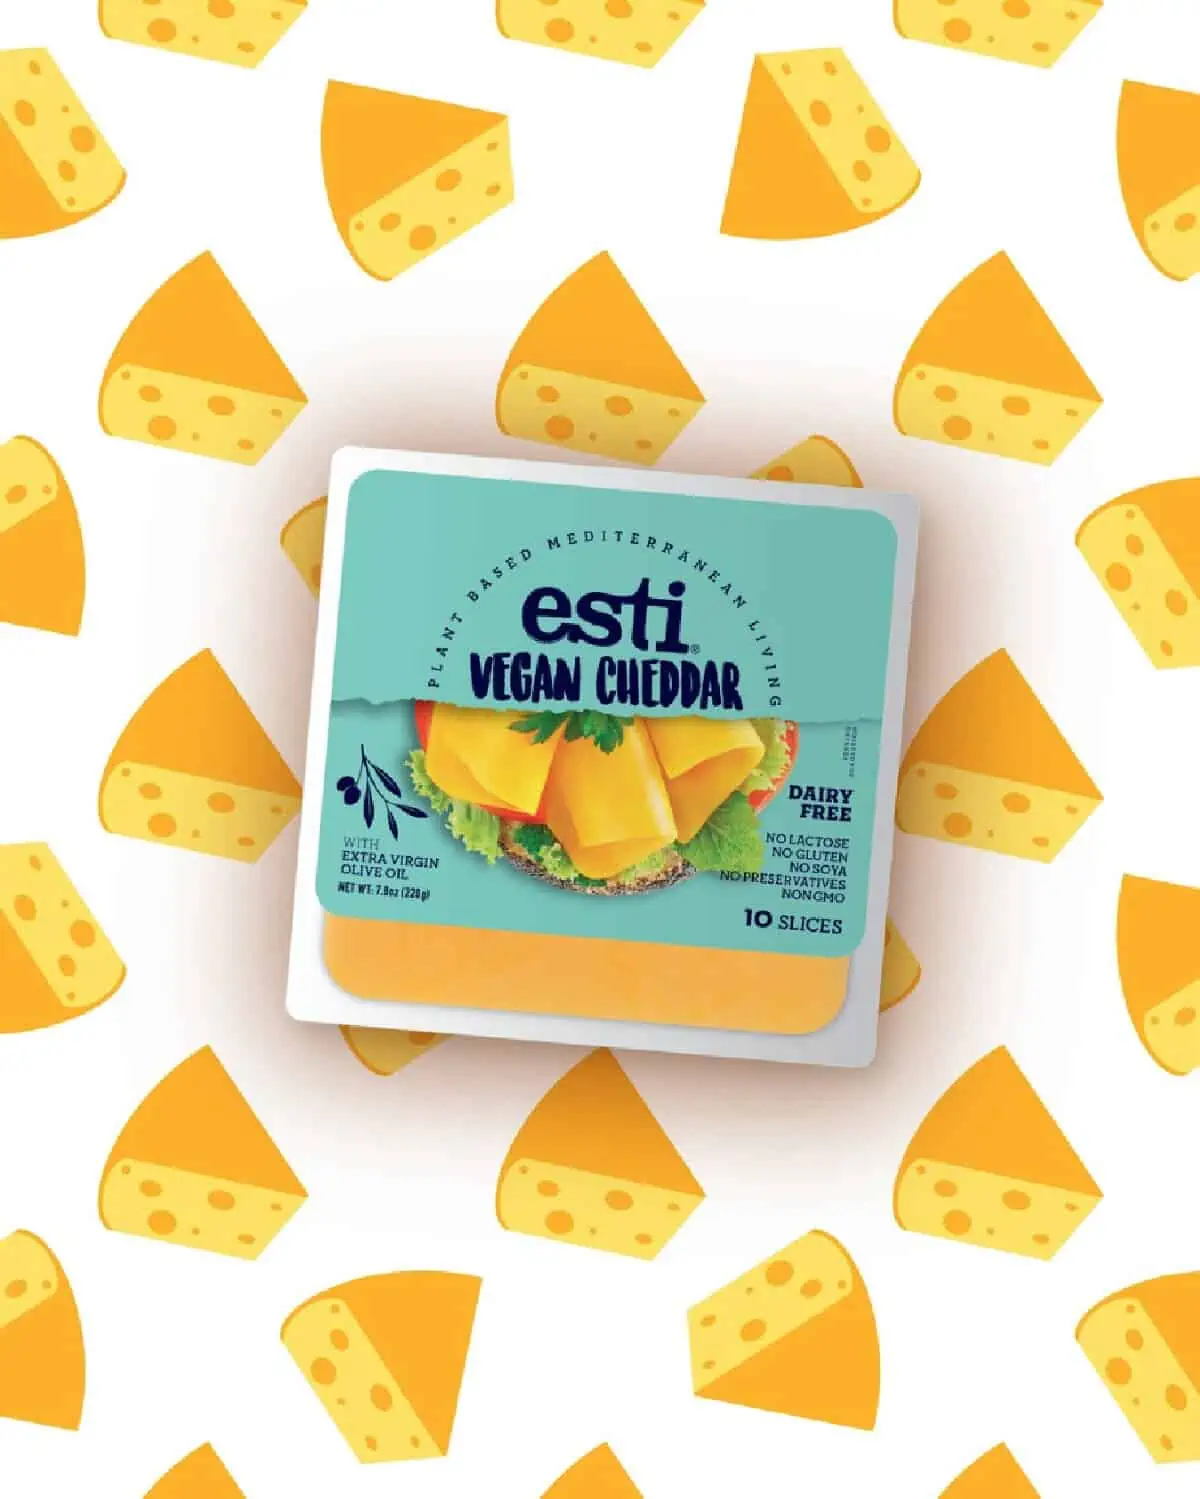 A turquoise colored package of Esti vegan cheese against a background of white and orange cheese wedge drawings. 